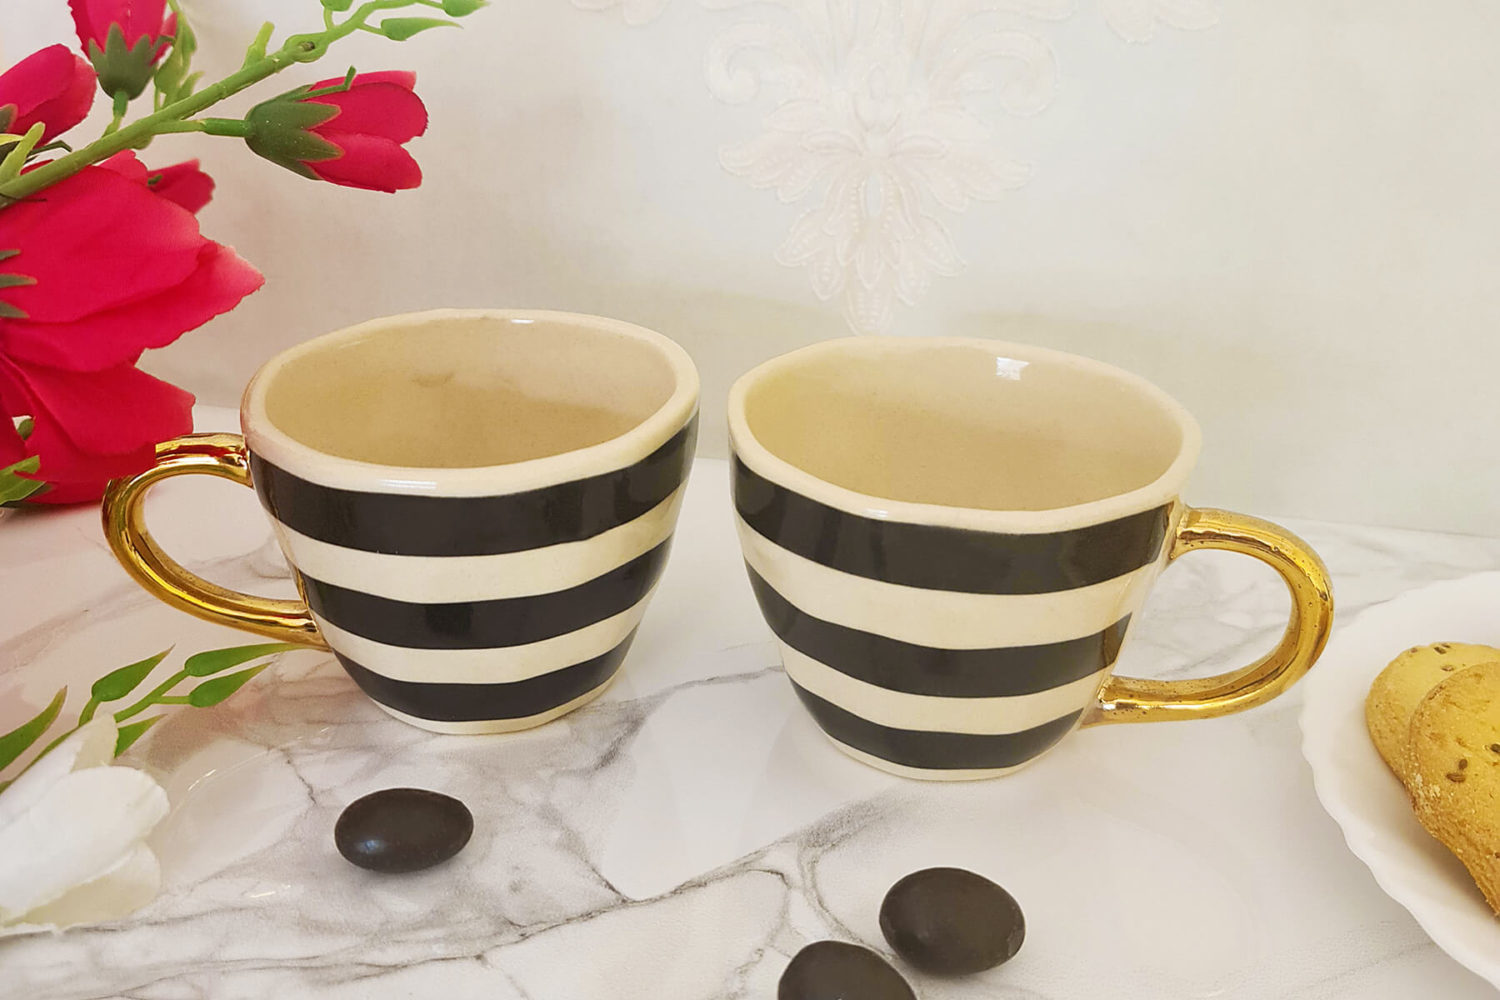 Unique Coffee Mugs For Make Your Coffee Time Special - Indian Artisans